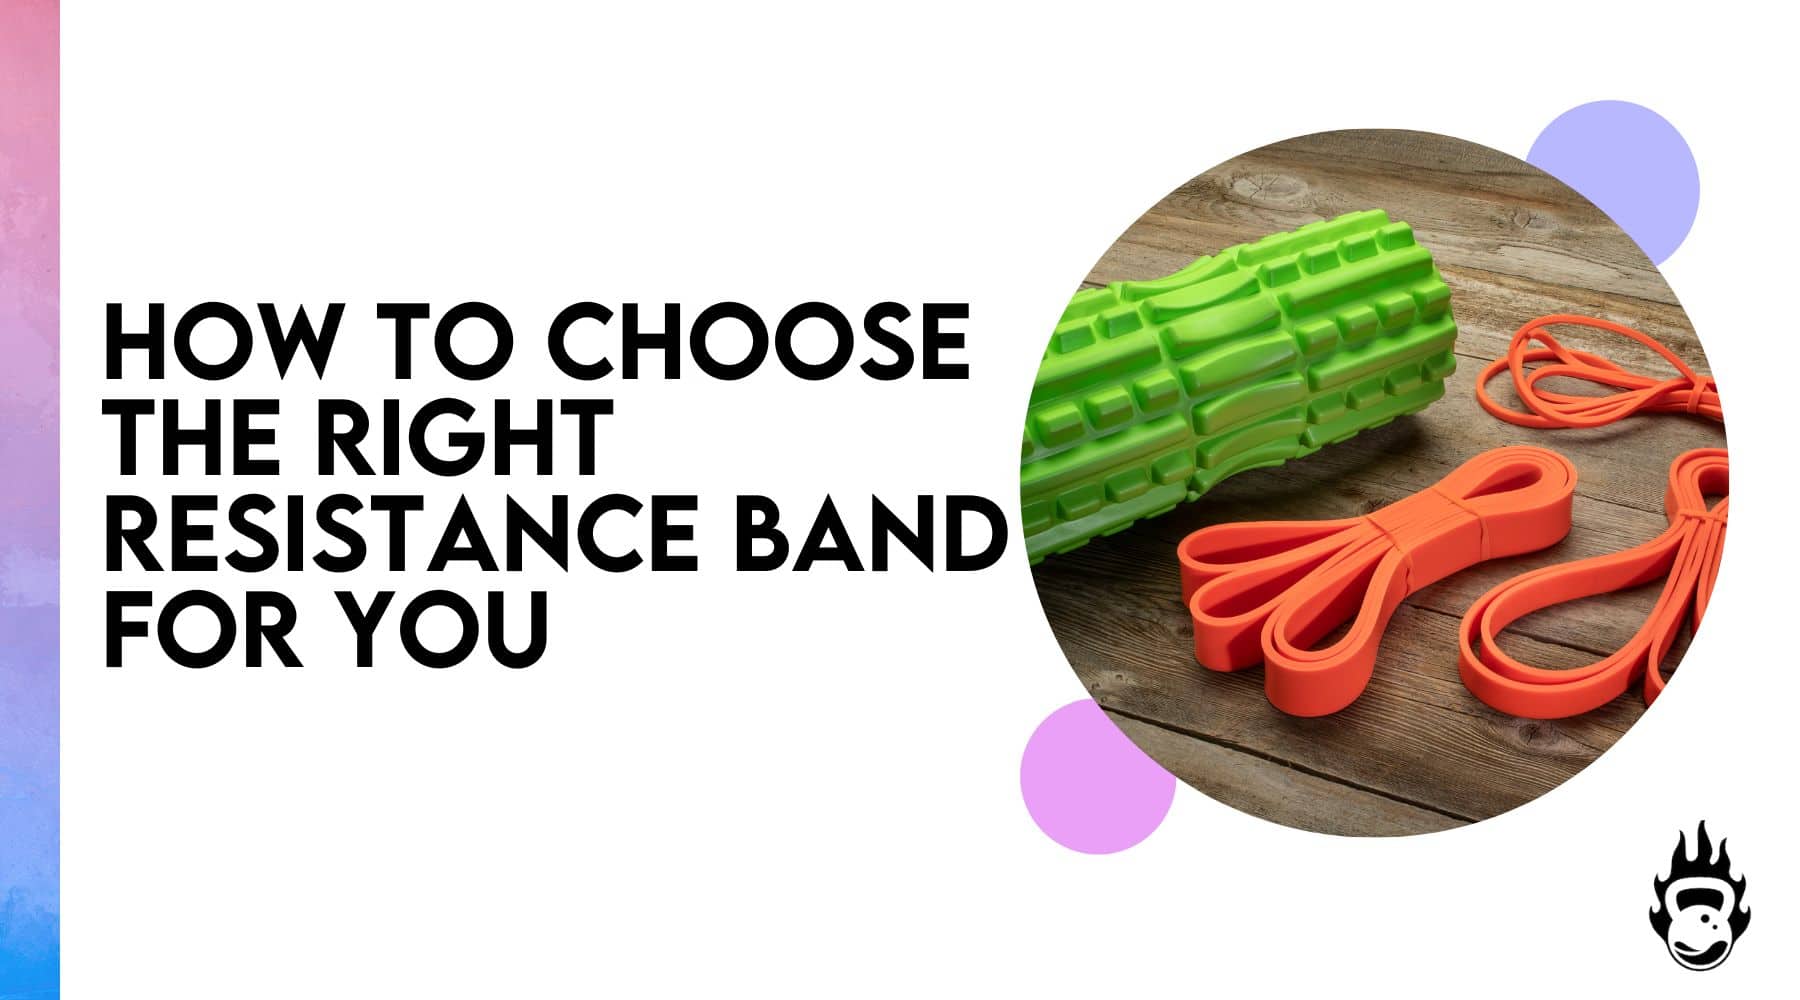 How to choose resistance band